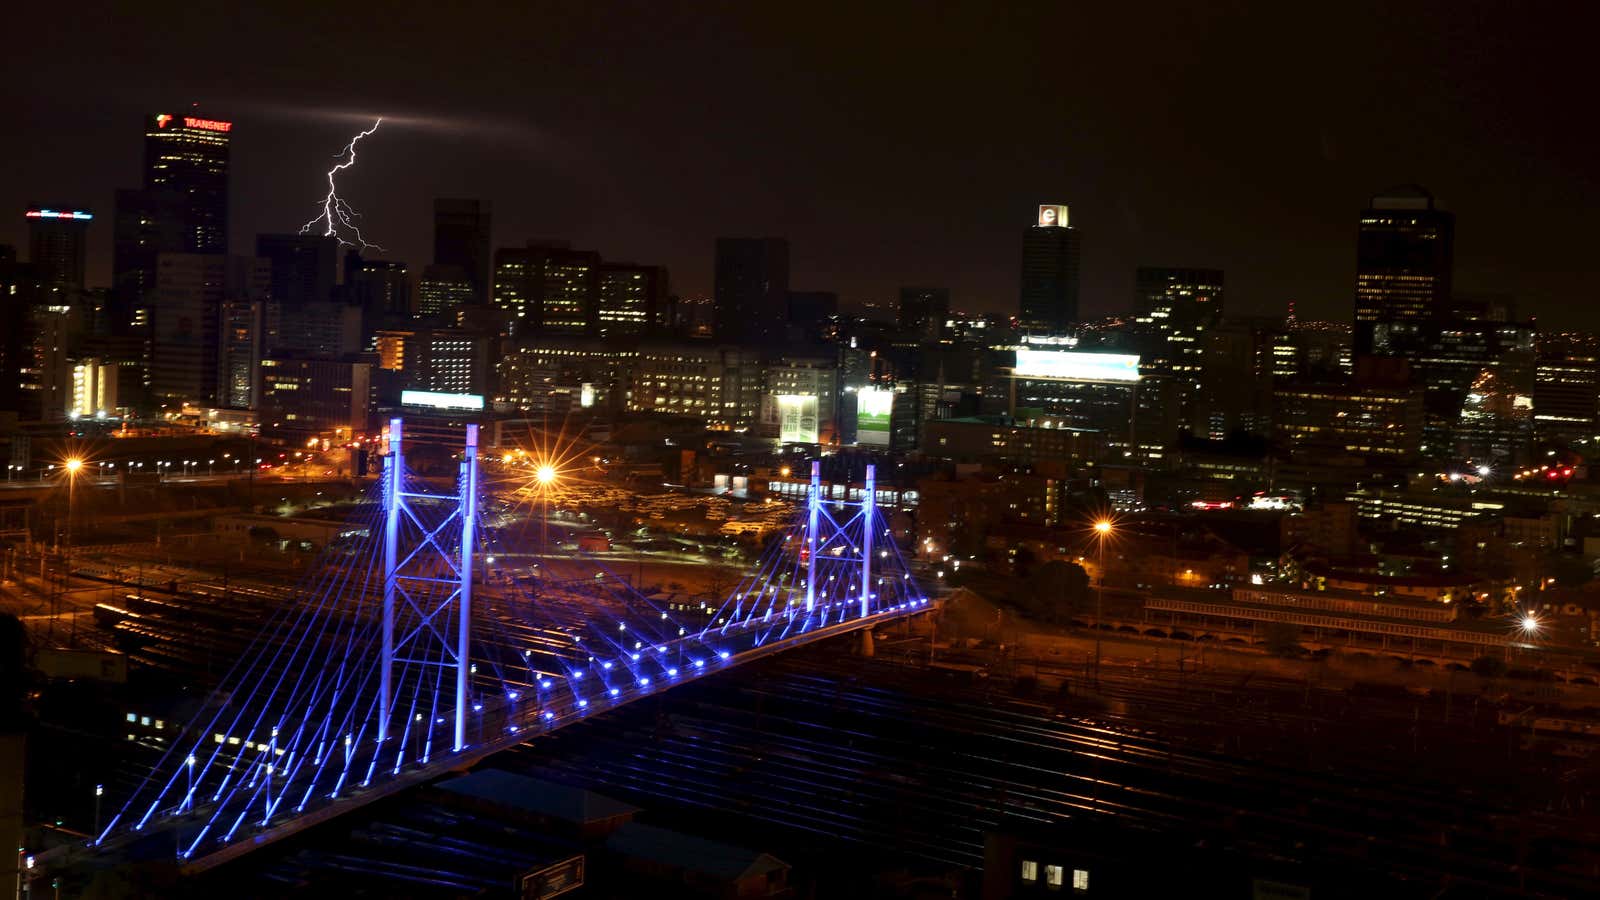 Dark times for the ANC as it loses Johannesburg.